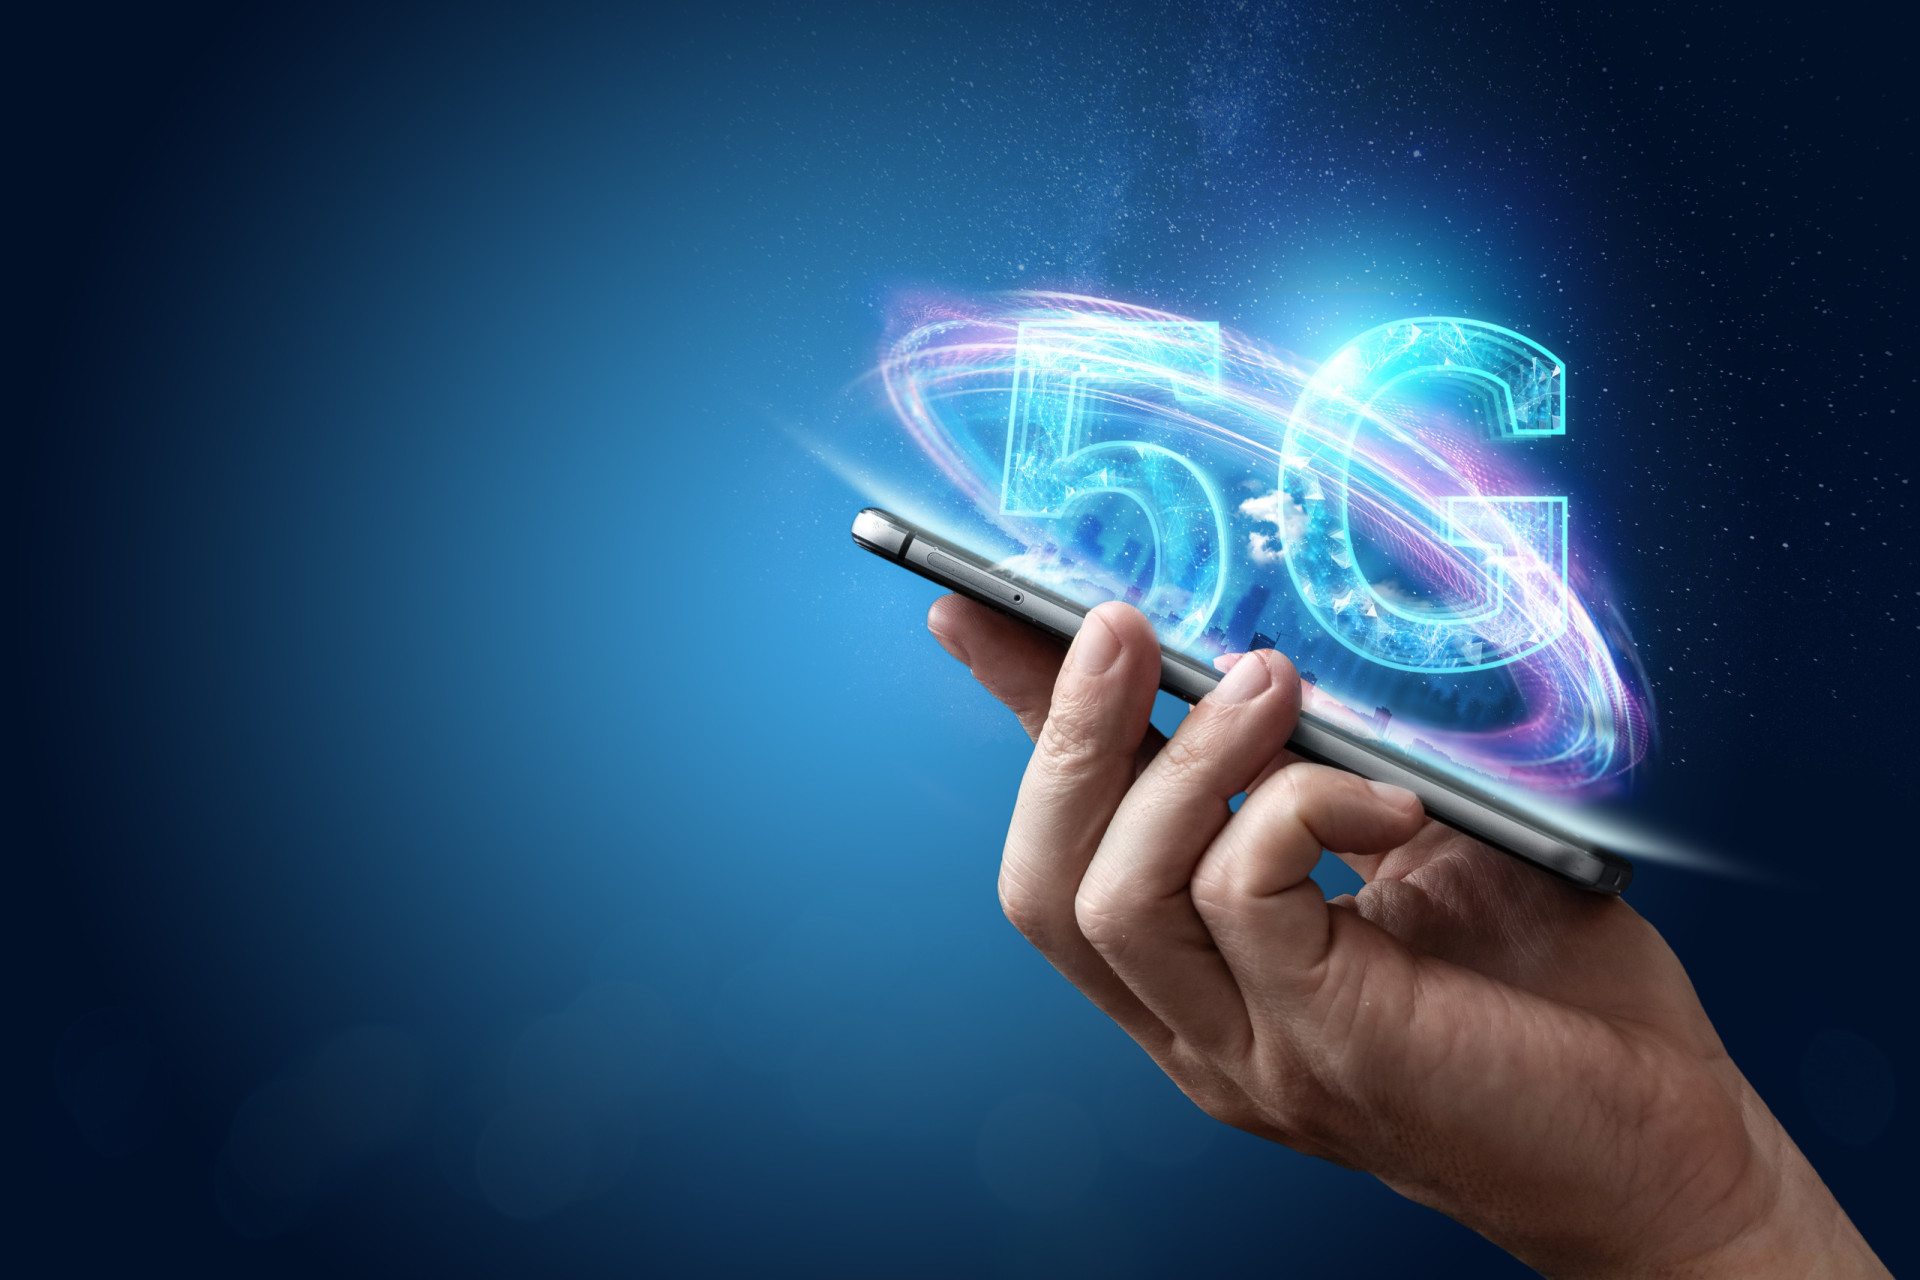 <p>5G is the fifth generation of wireless technology, delivering faster speeds and lower latency. It enables seamless connectivity, supports emerging technologies like AR and VR, and transforms communication and data transfer.</p>